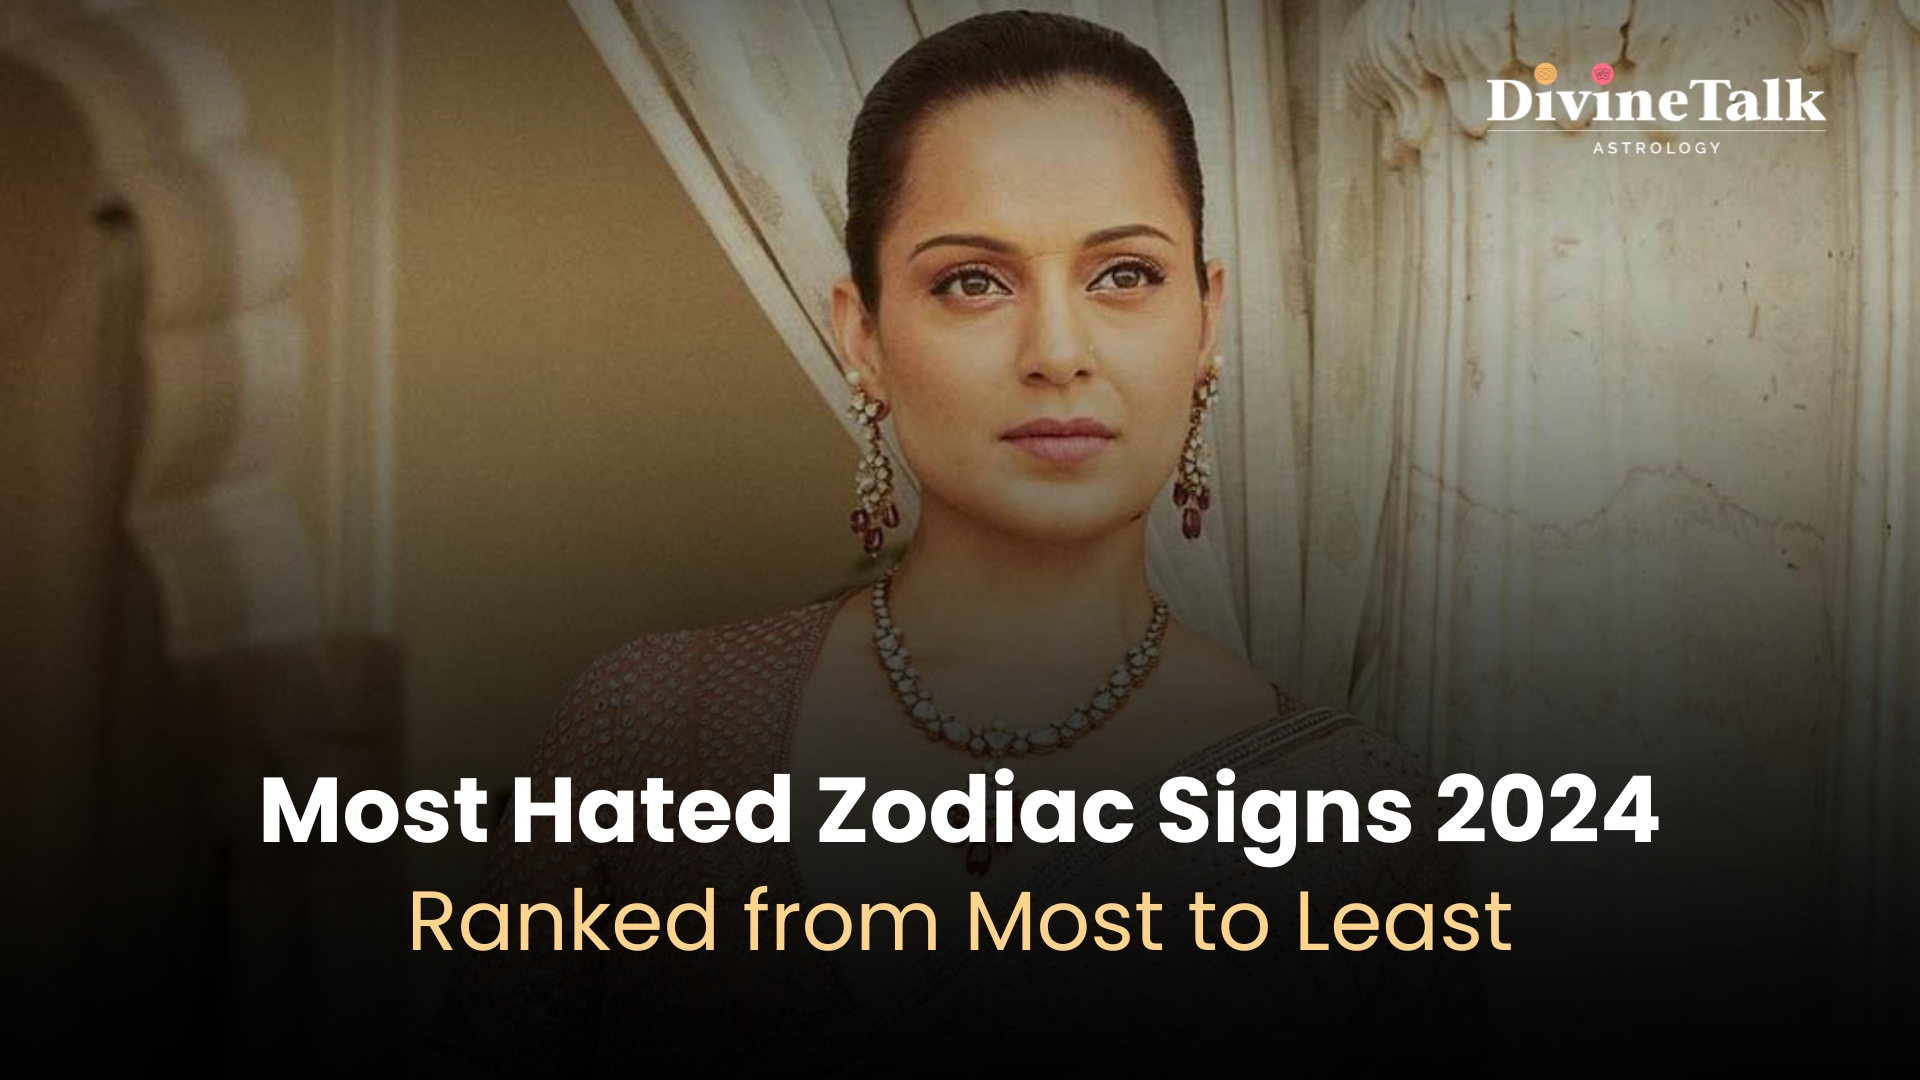 Most Hated Zodiac Signs 2024 Ranked from Most to Least